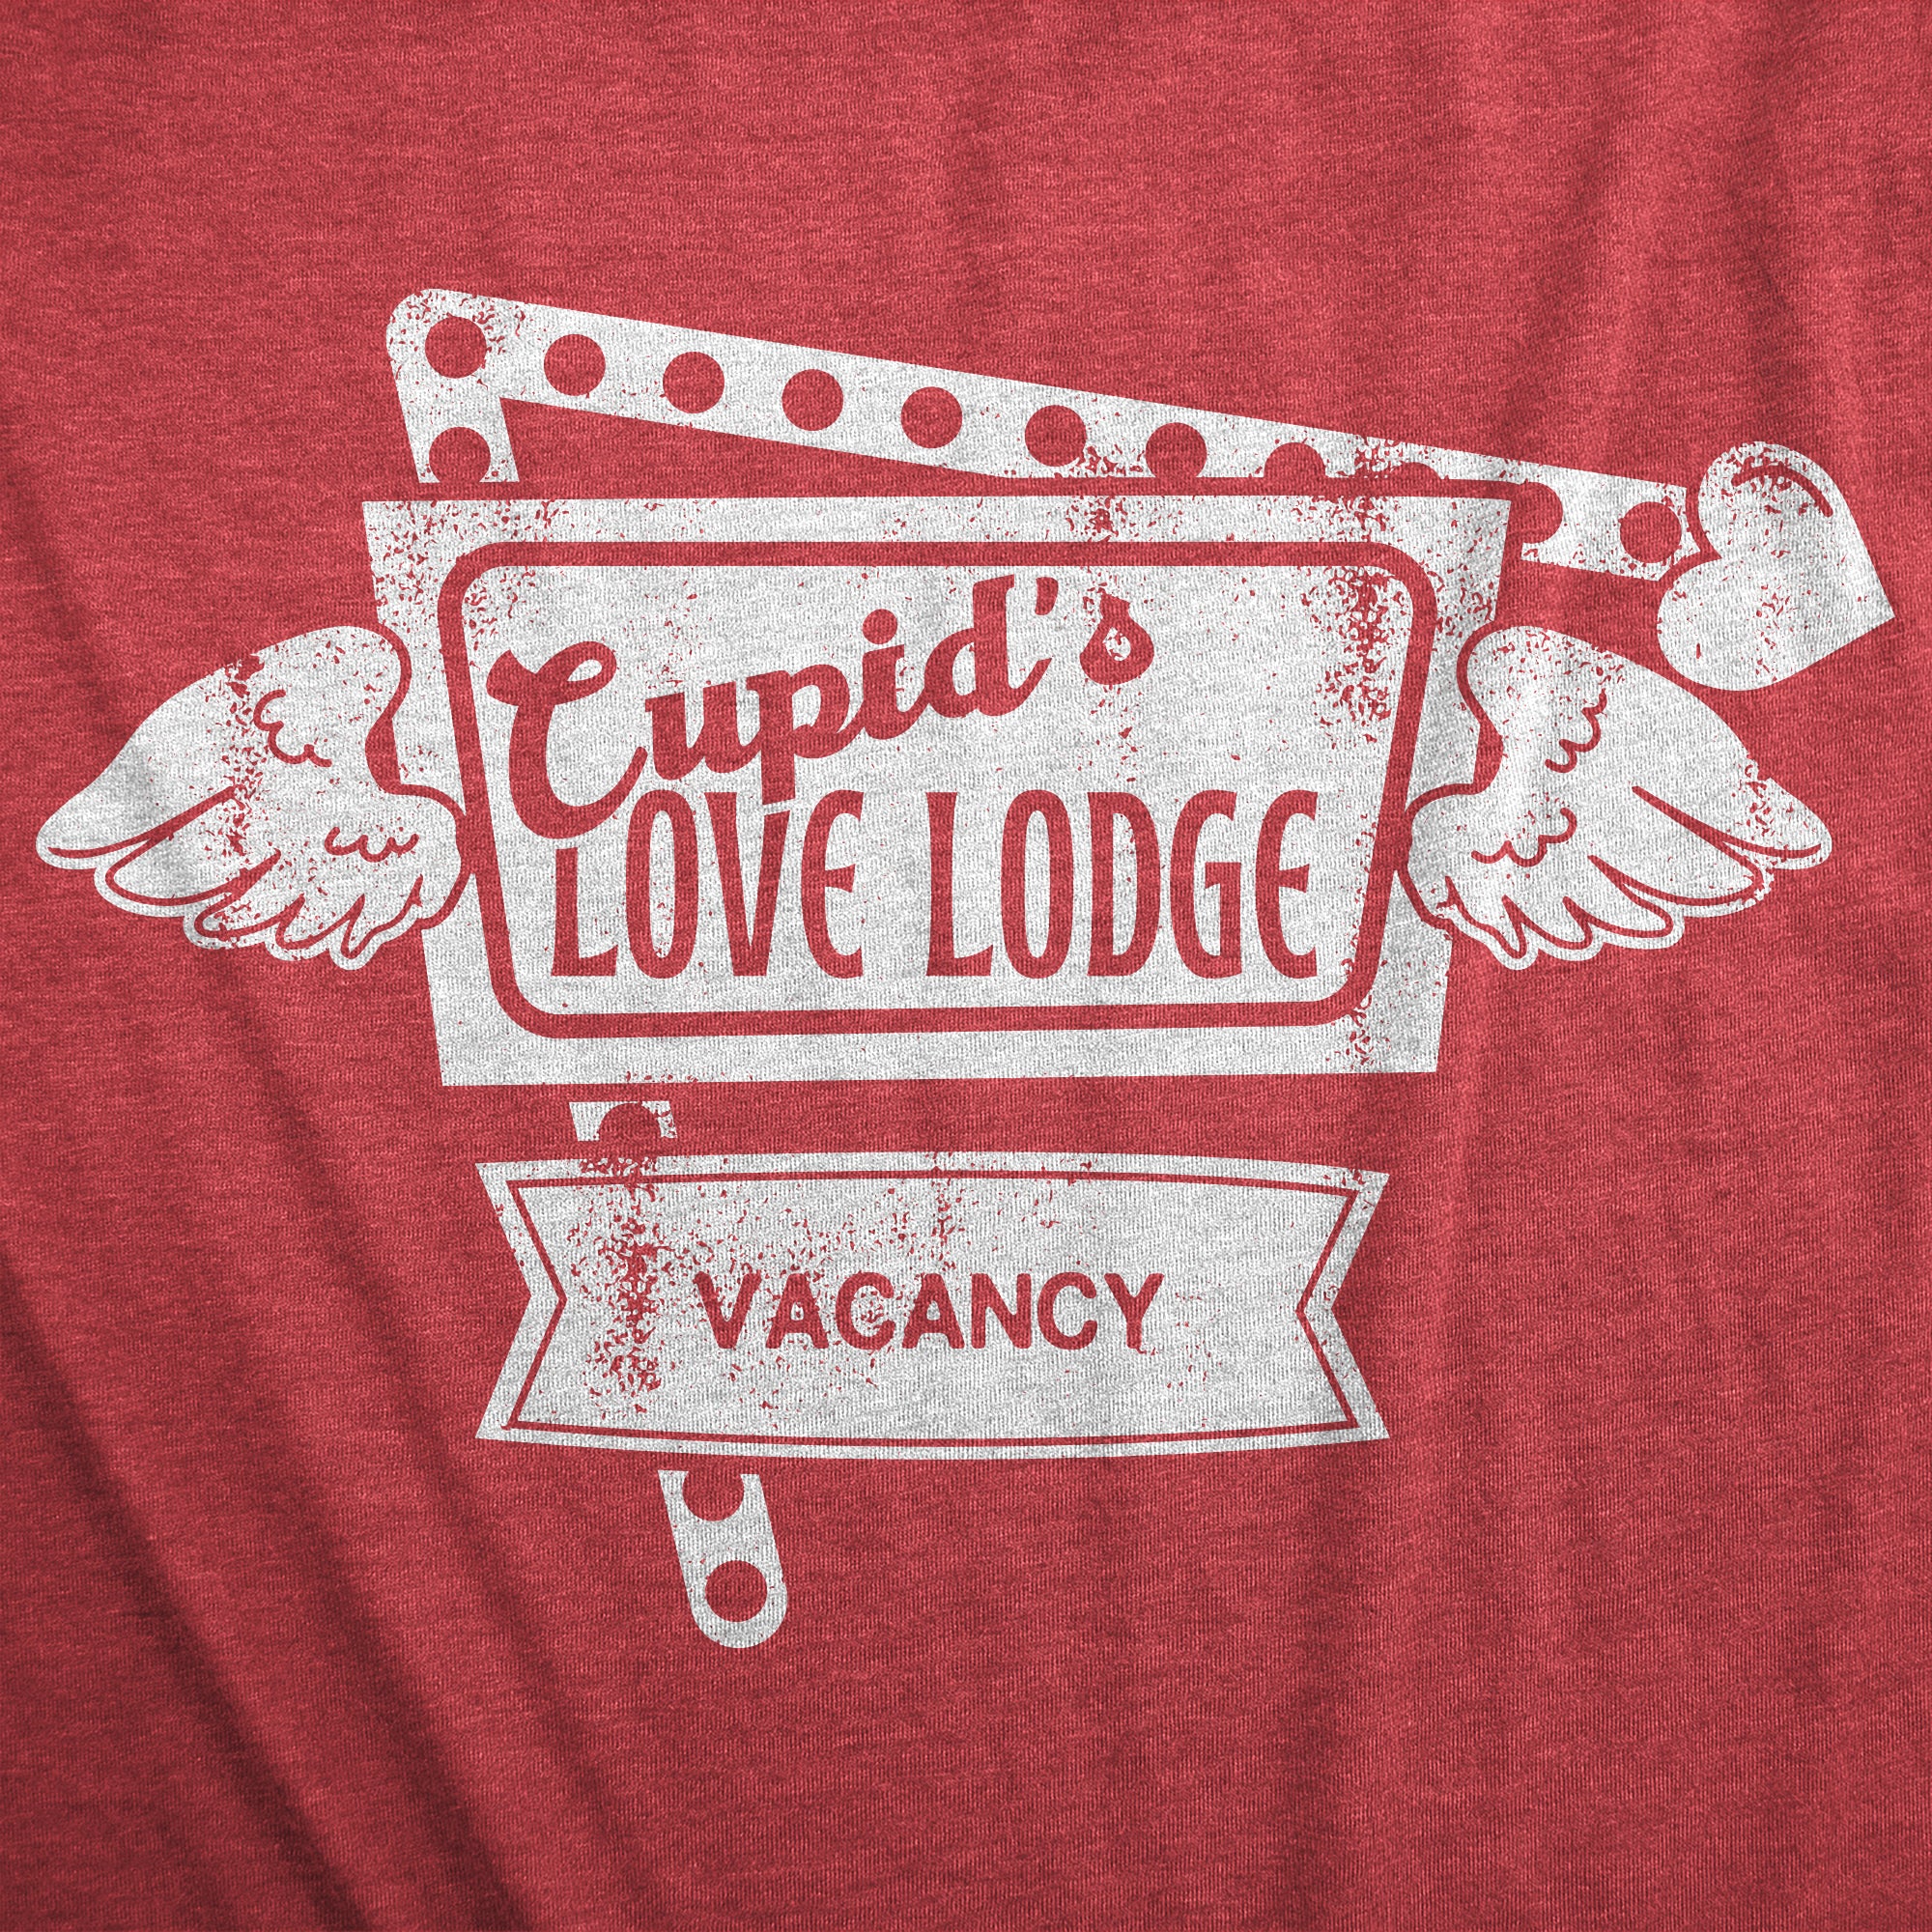 Funny Heather Red - LODGE Cupids Love Lodge Womens T Shirt Nerdy Valentine's Day Tee